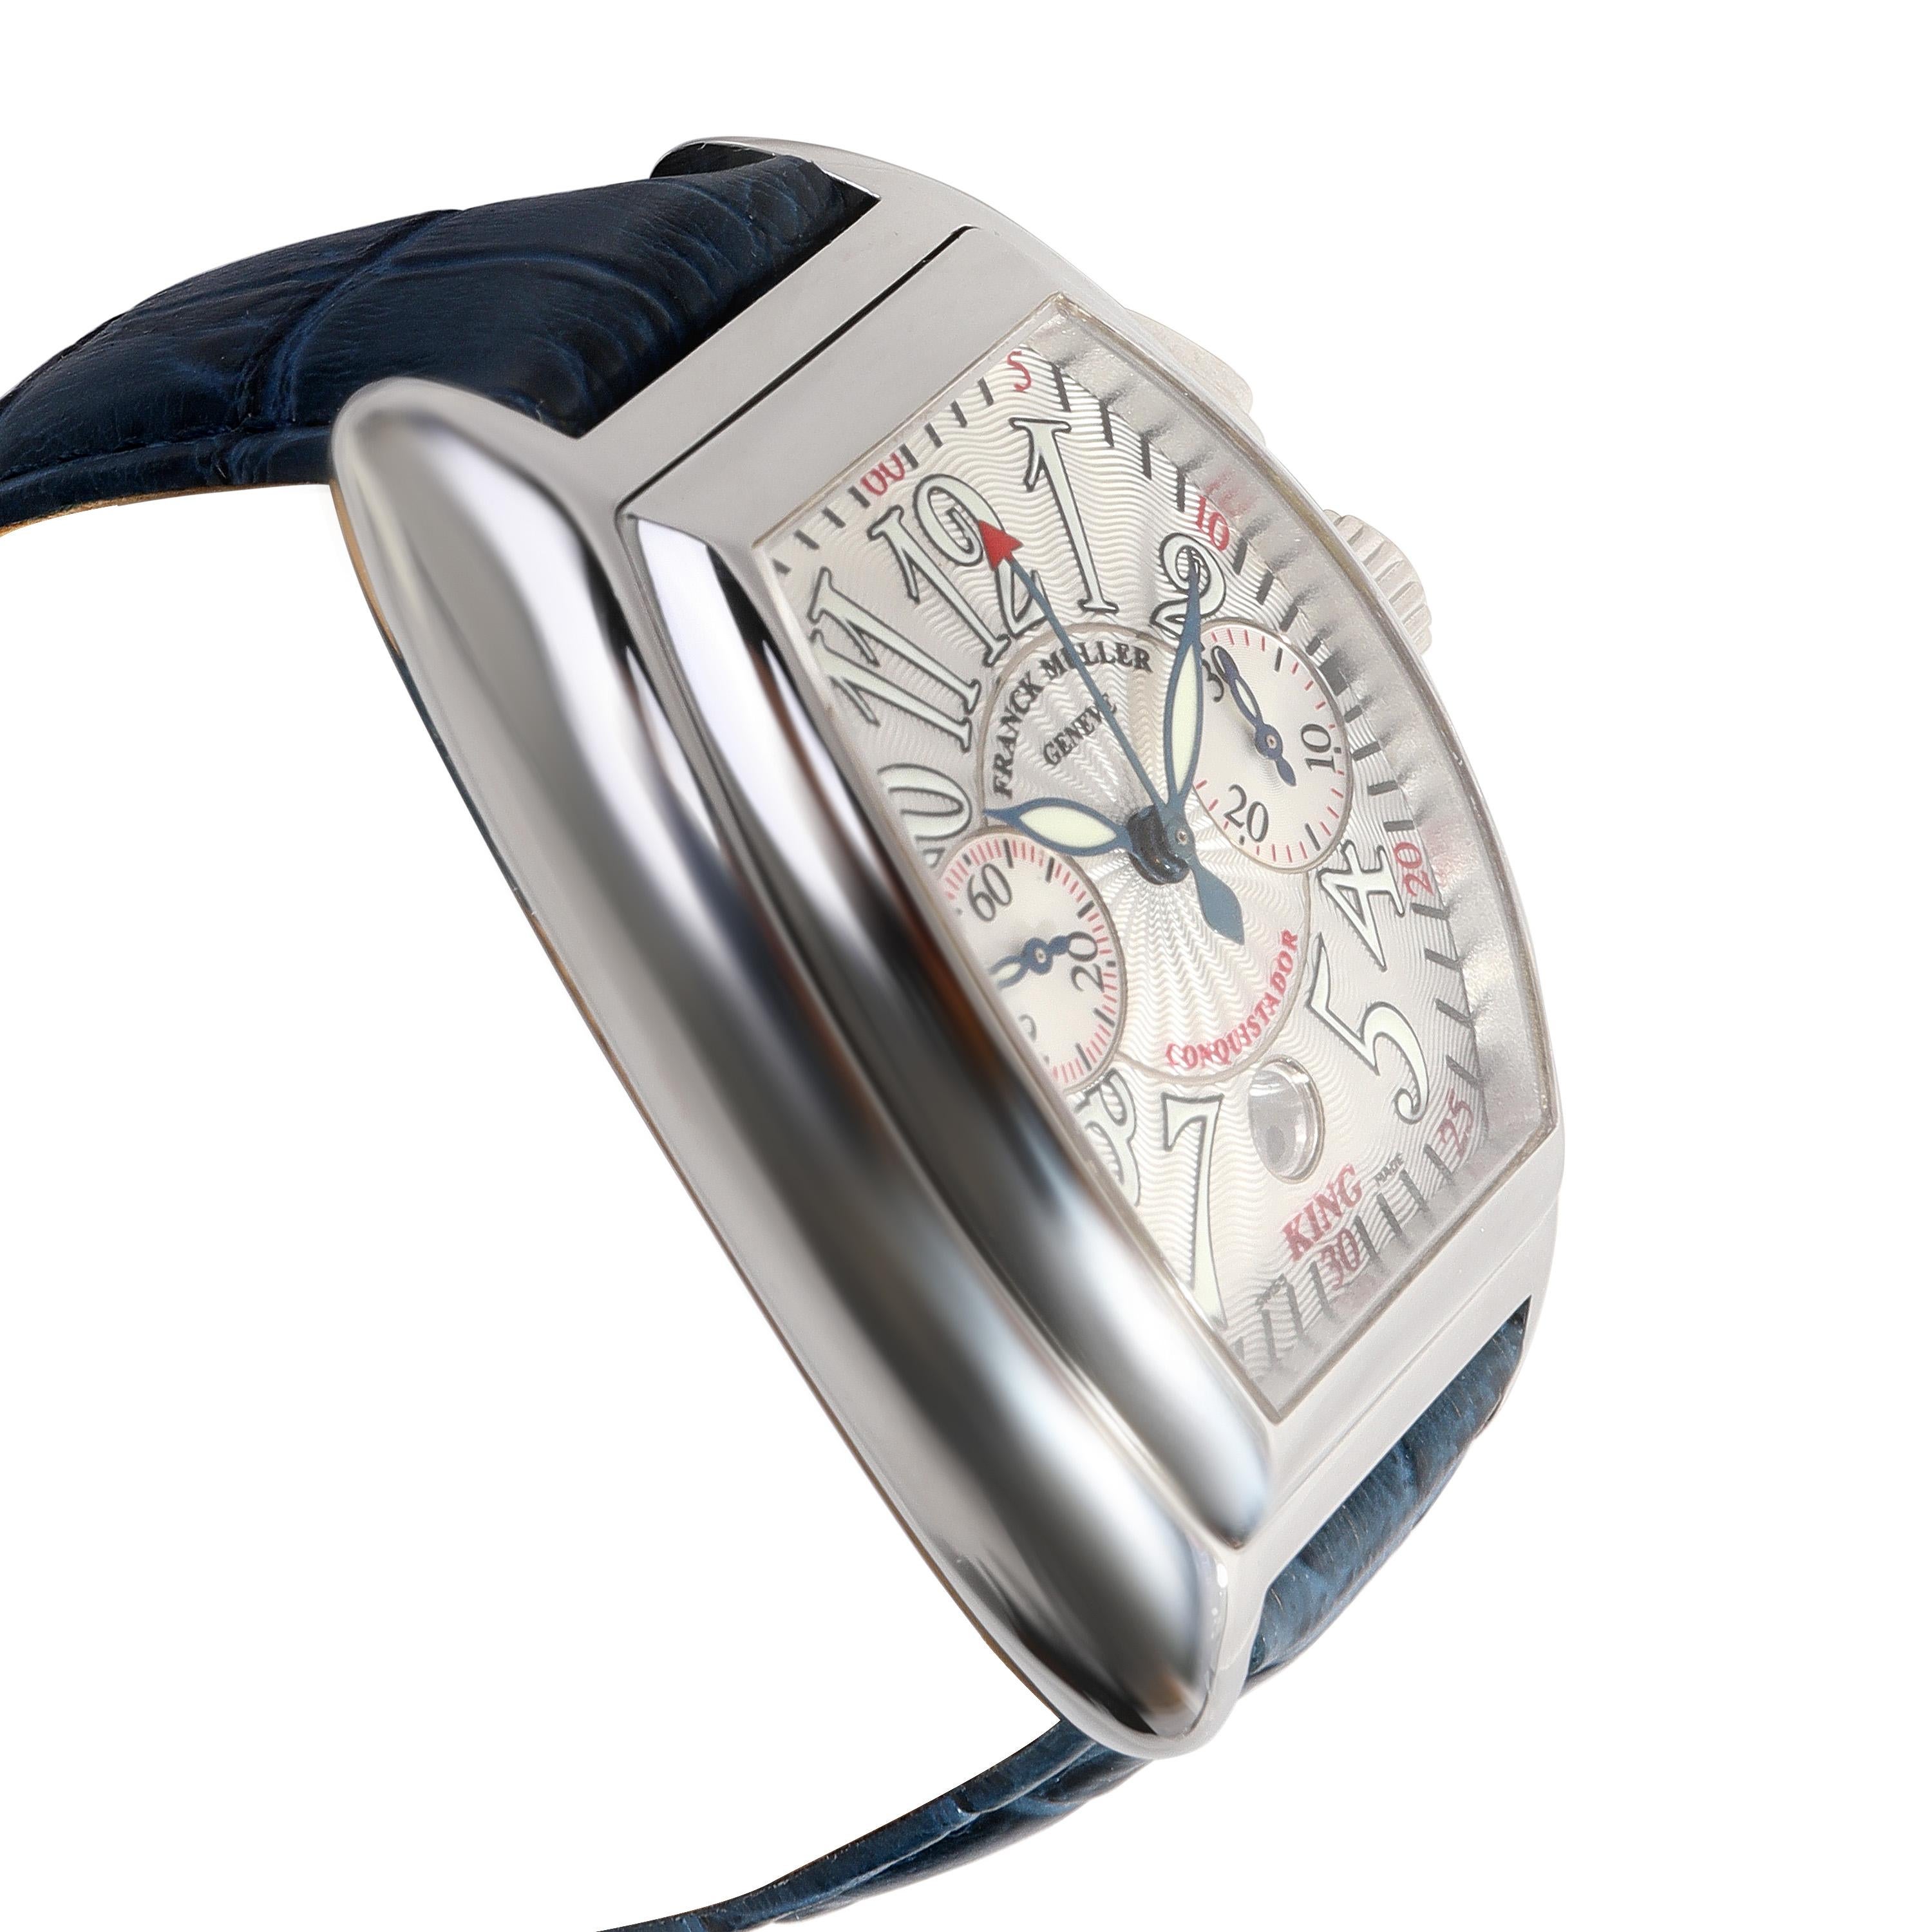 most expensive franck muller watch